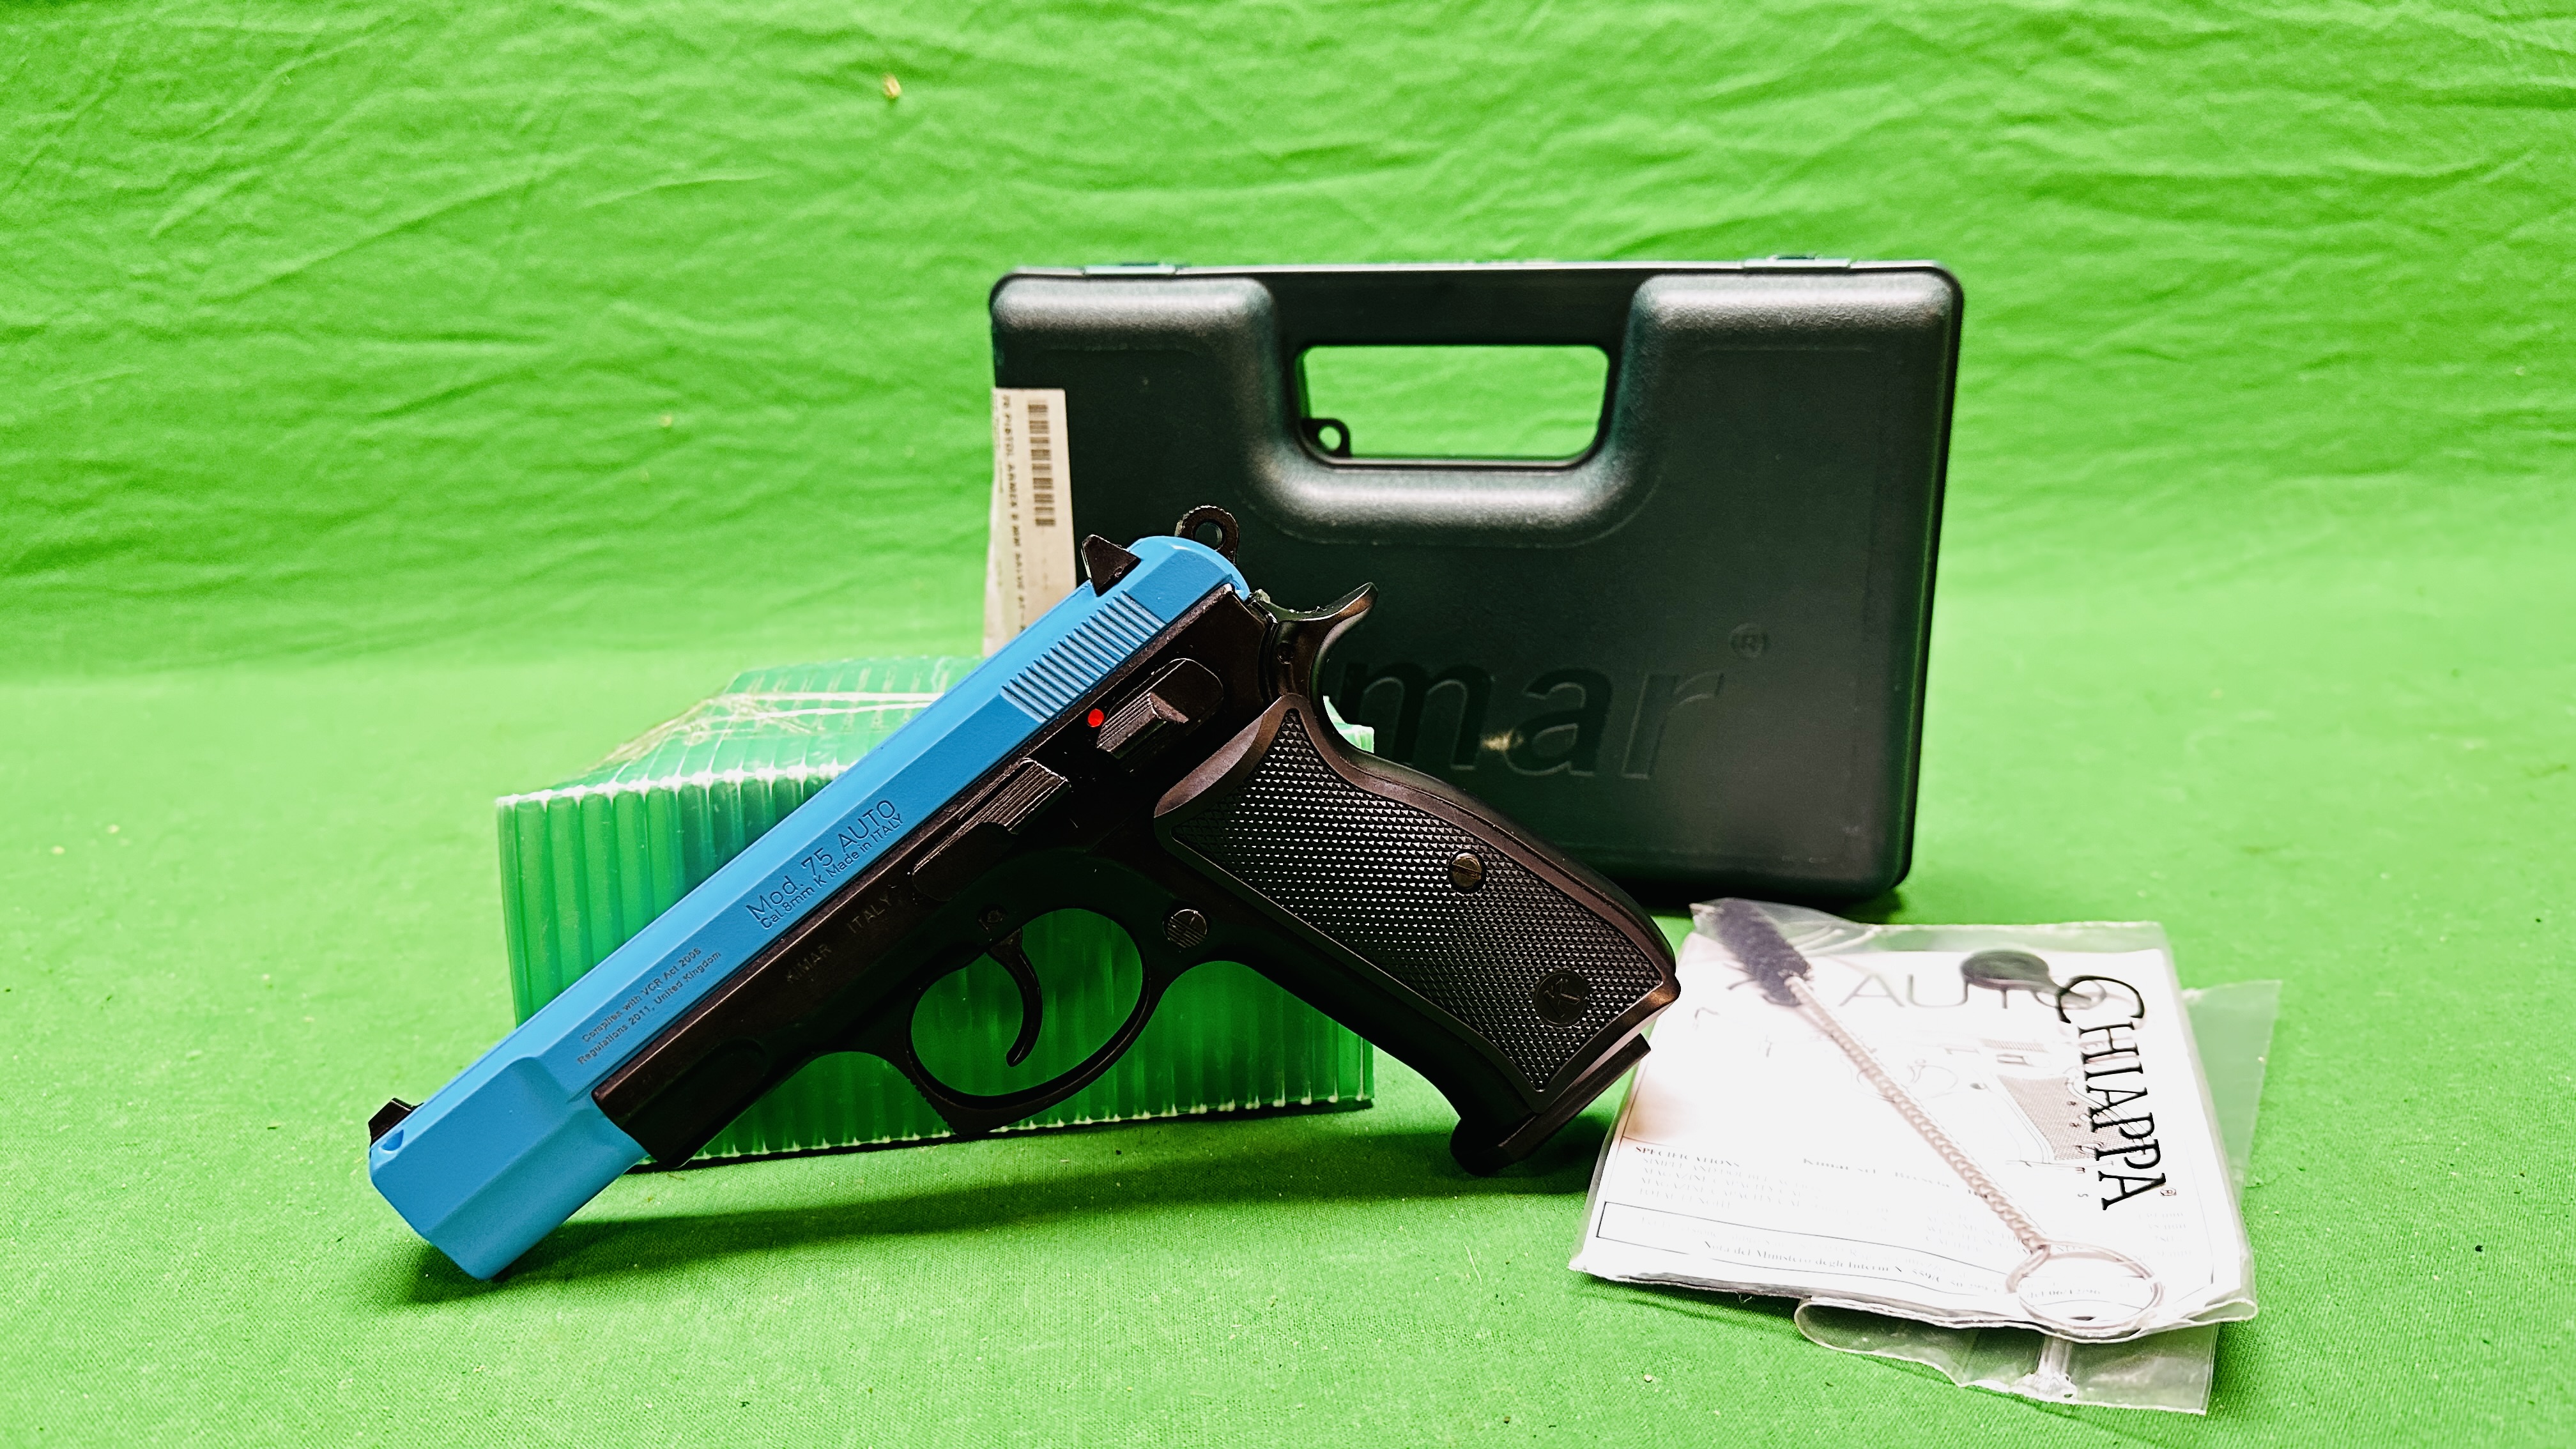 A BOXED CHIPPA 75 ARMEX 8MM BLANK FIRE PISTOL COMPLETE WITH INSTRUCTIONS AND CLEANING ROD - (ALL